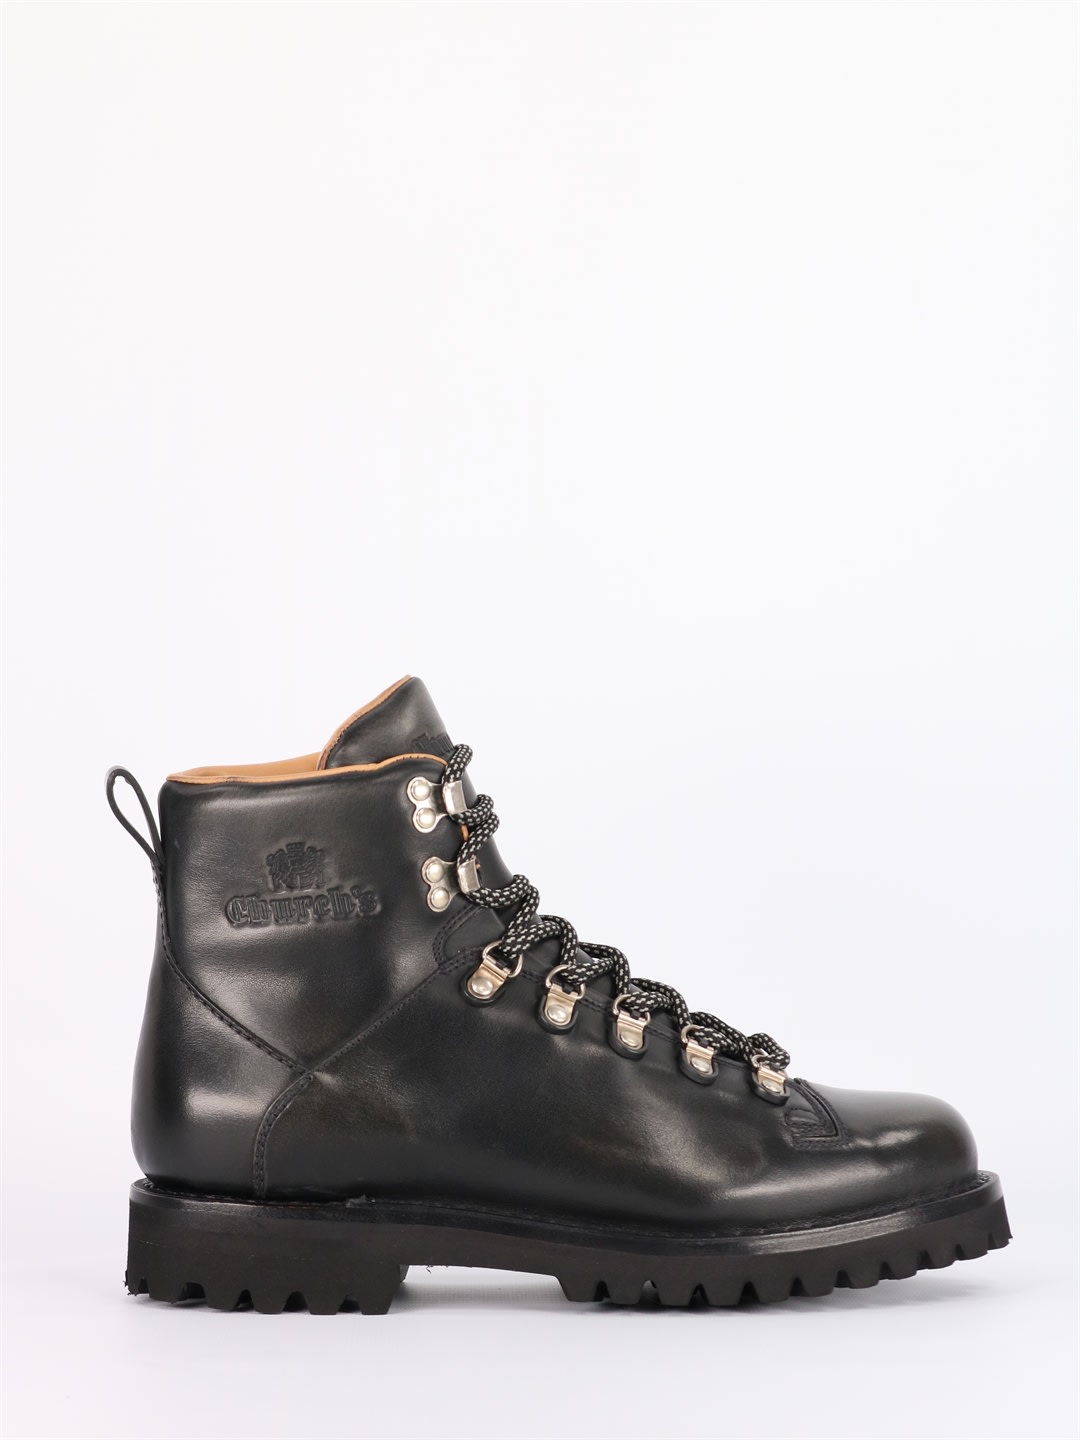 Churchs Edelweiss Leather Ankle Boots